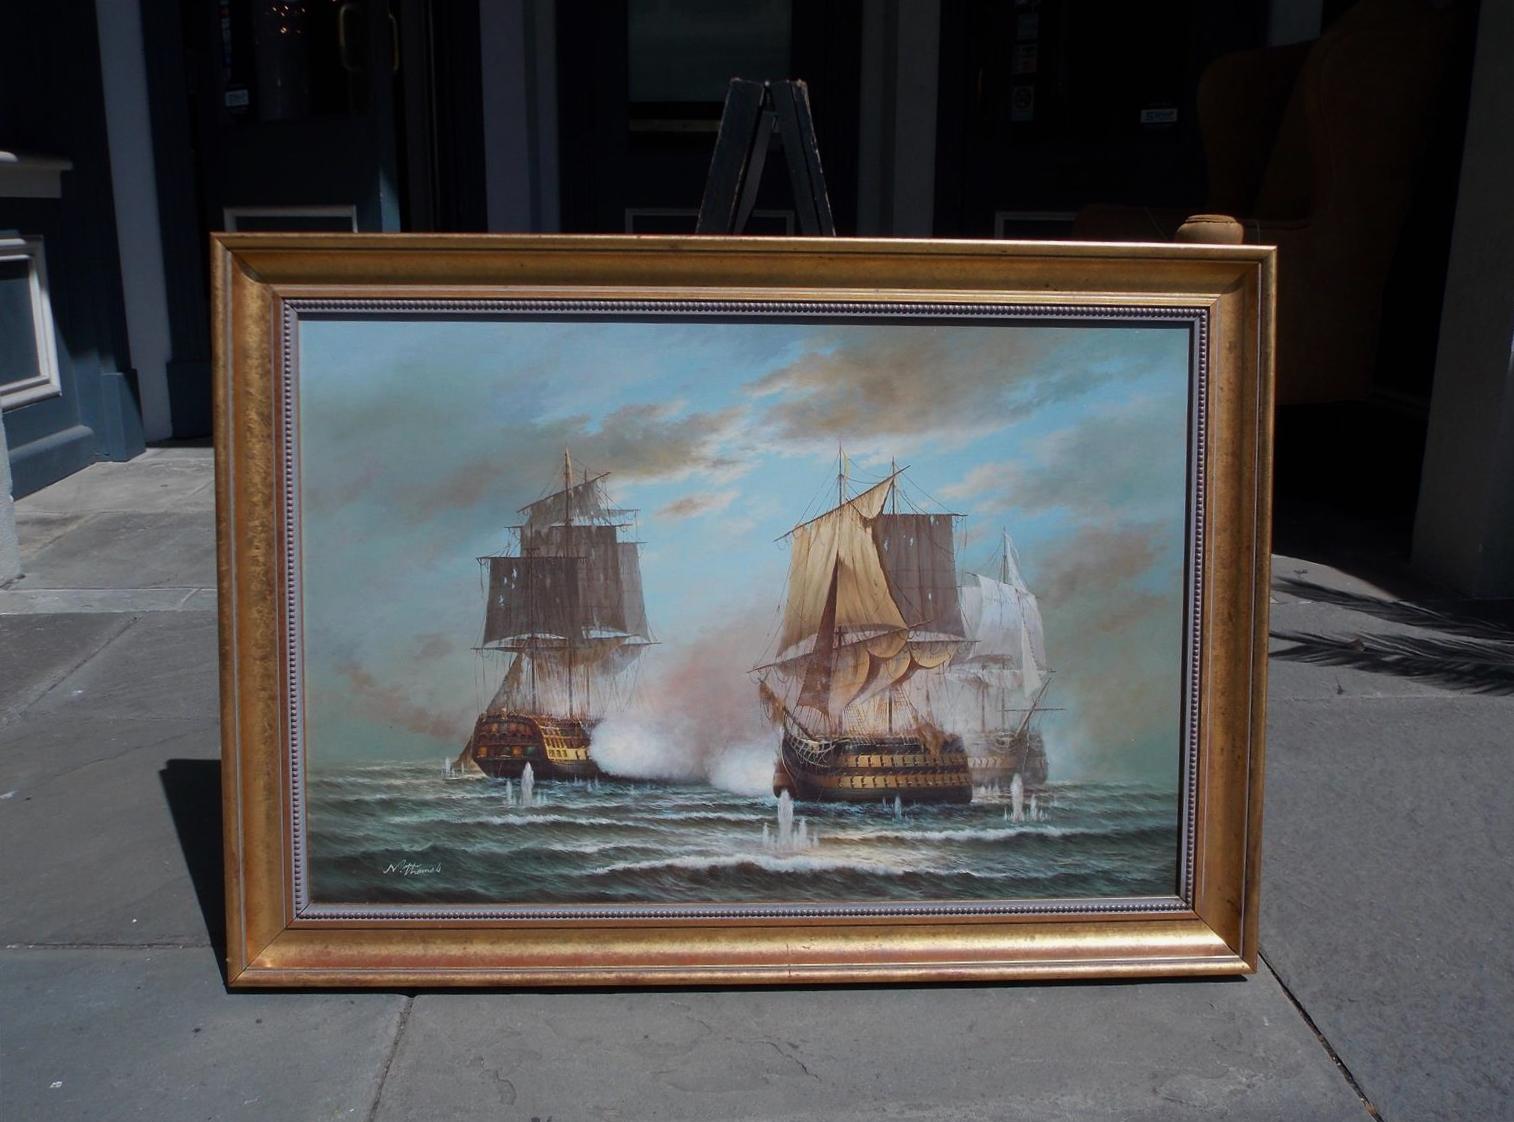 American Nautical oil on canvas with three battling ships at sea in the original gilt frame, 20th century. Signed by Artist N. Thomas.